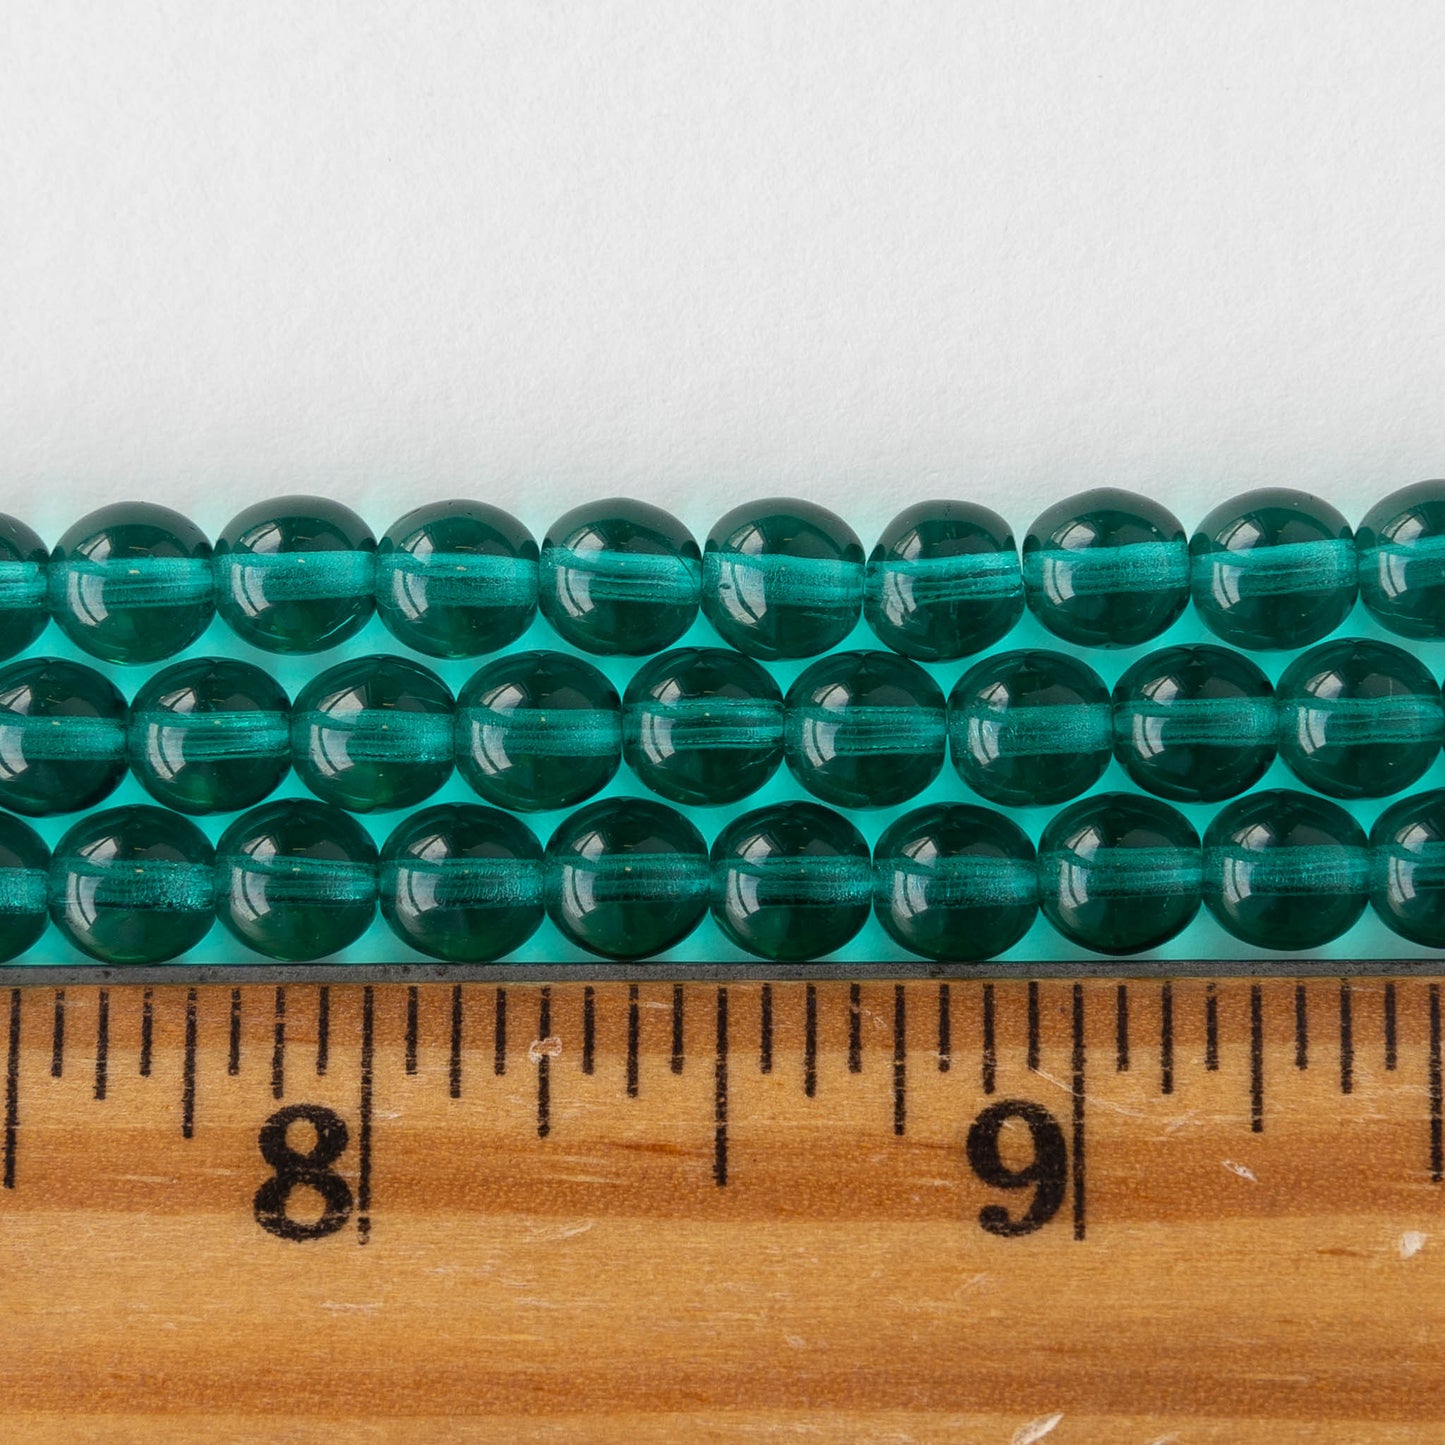 6mm Round Glass Beads - Viridian Teal - 50 – funkyprettybeads